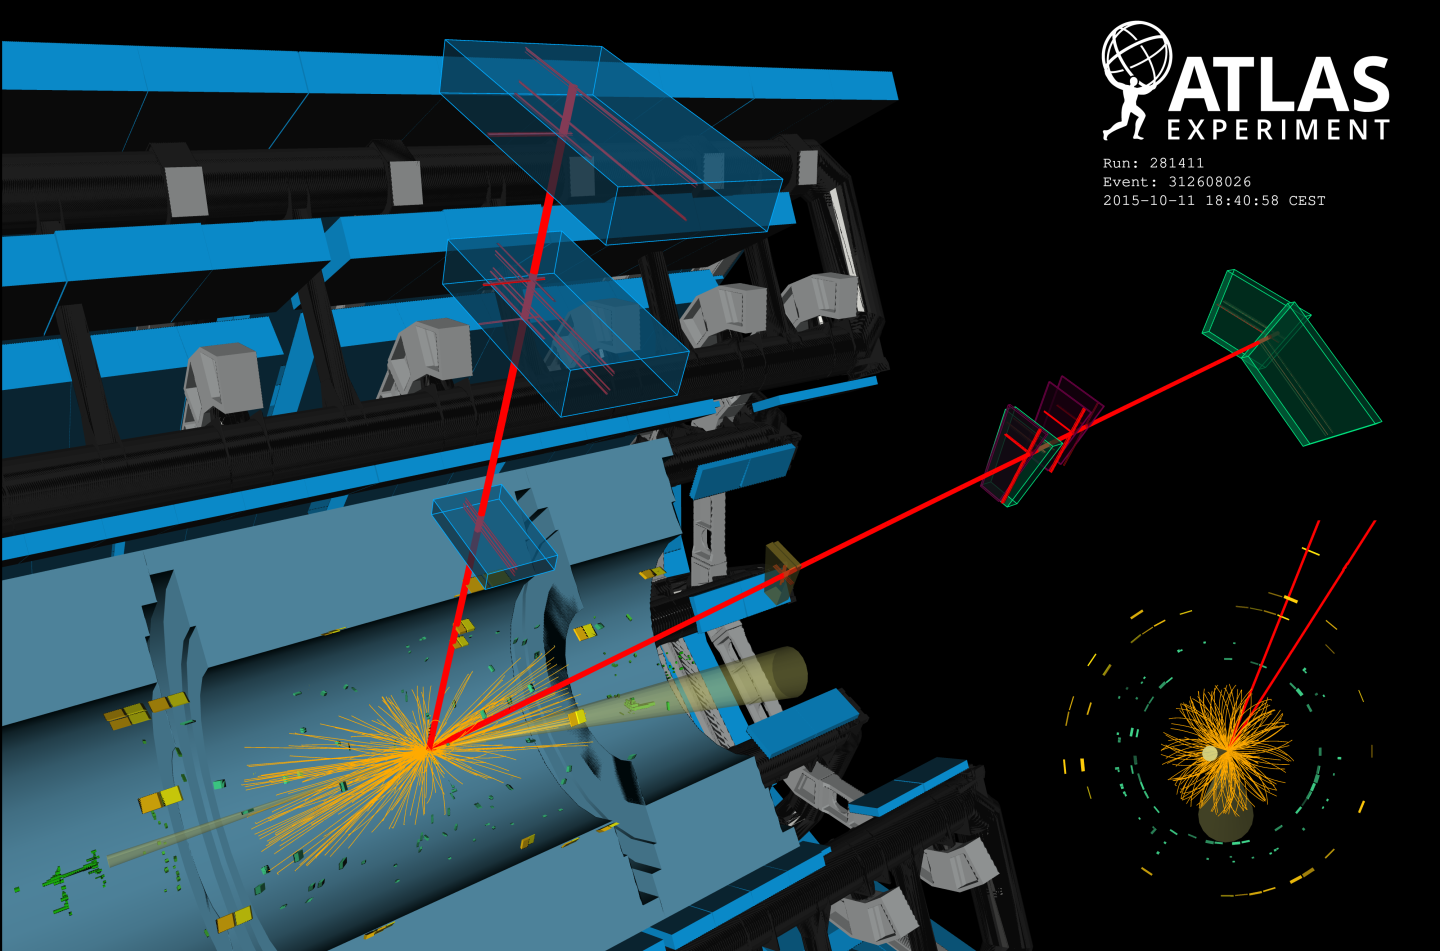 Image - A display of a candidate Higgs boson event at CERN’s ATLAS experiment in which a Higgs boson decays to two muons. The muons appear as red tracks in this rendering. (Credit: ATLAS collaboration)